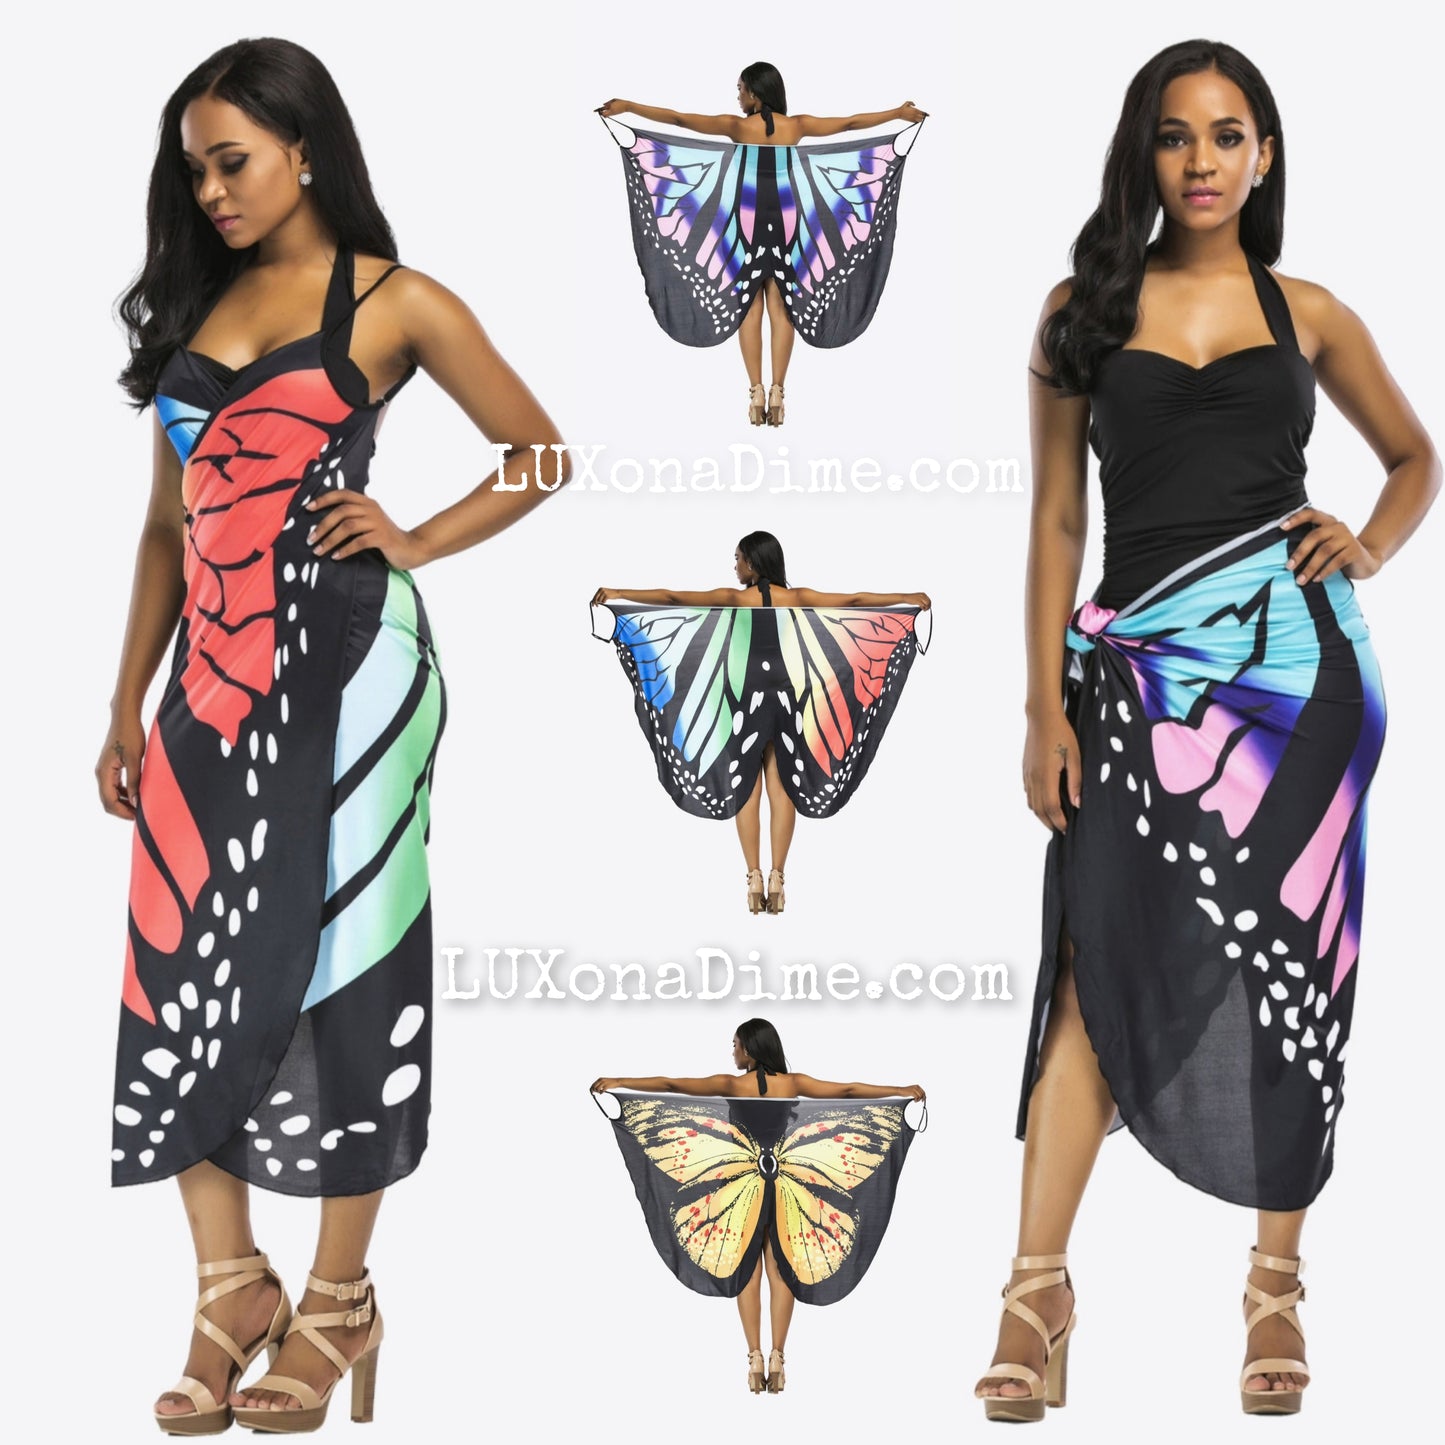 Butterfly Swimwear Cover Up Convertible Spaghetti Strap Dress or Sarong Skirt